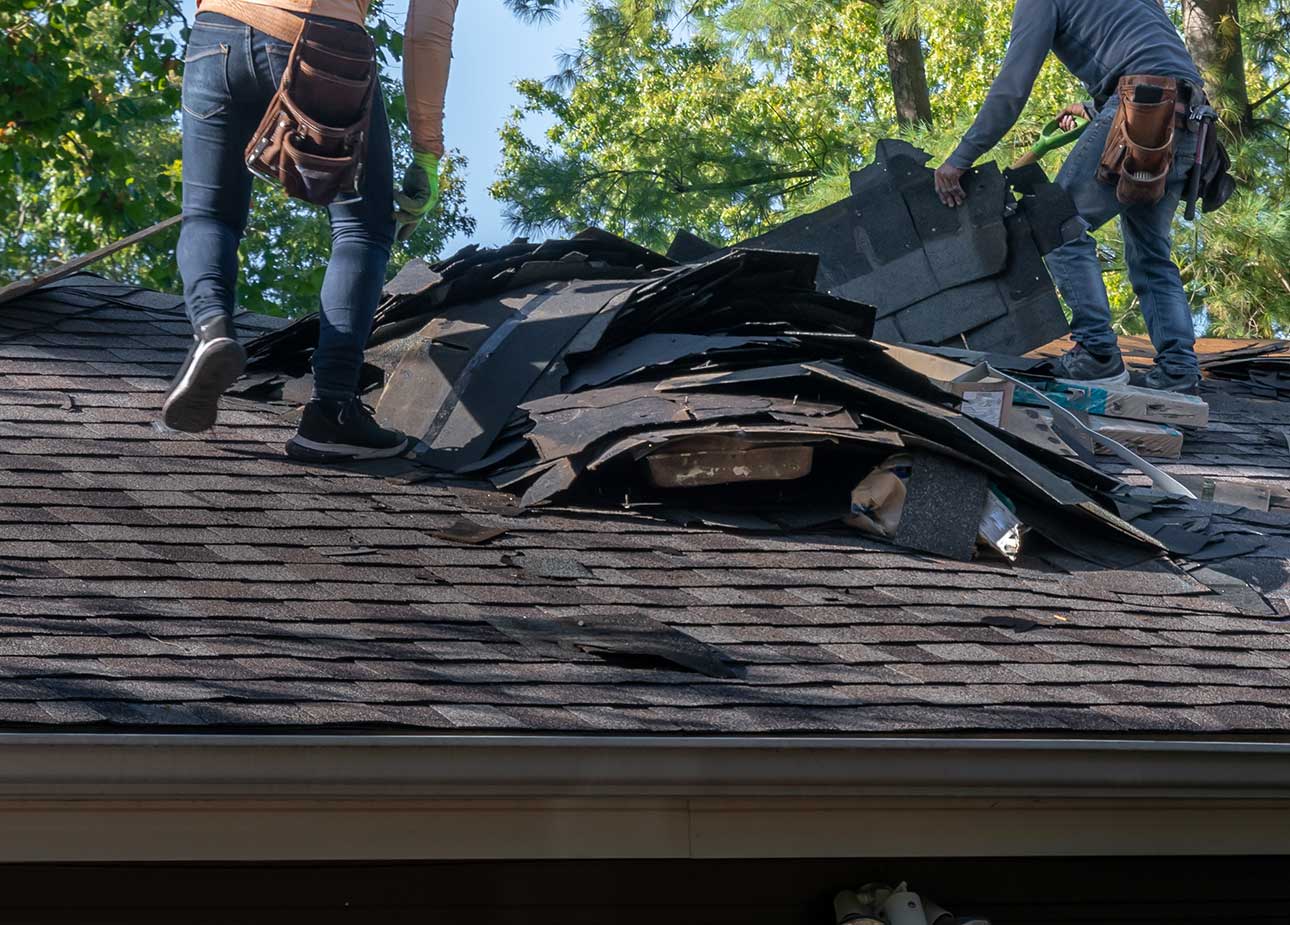 Roofers removing old roof shingles from a house in preparation for storm damage repair.